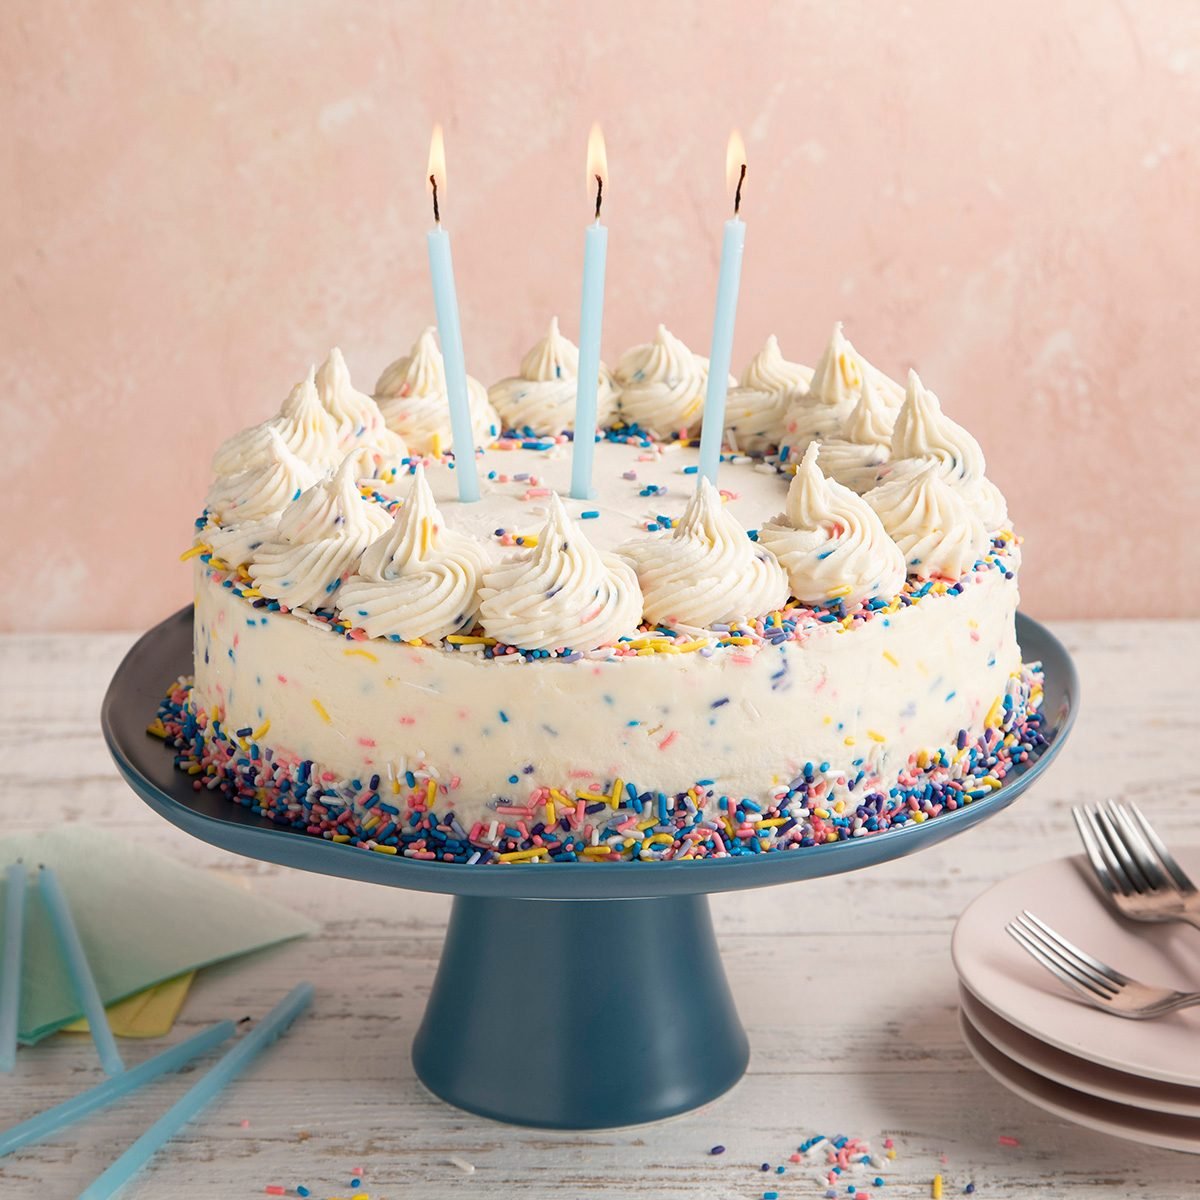 30 Birthday Cake Decorating Ideas That'll Steal the Show